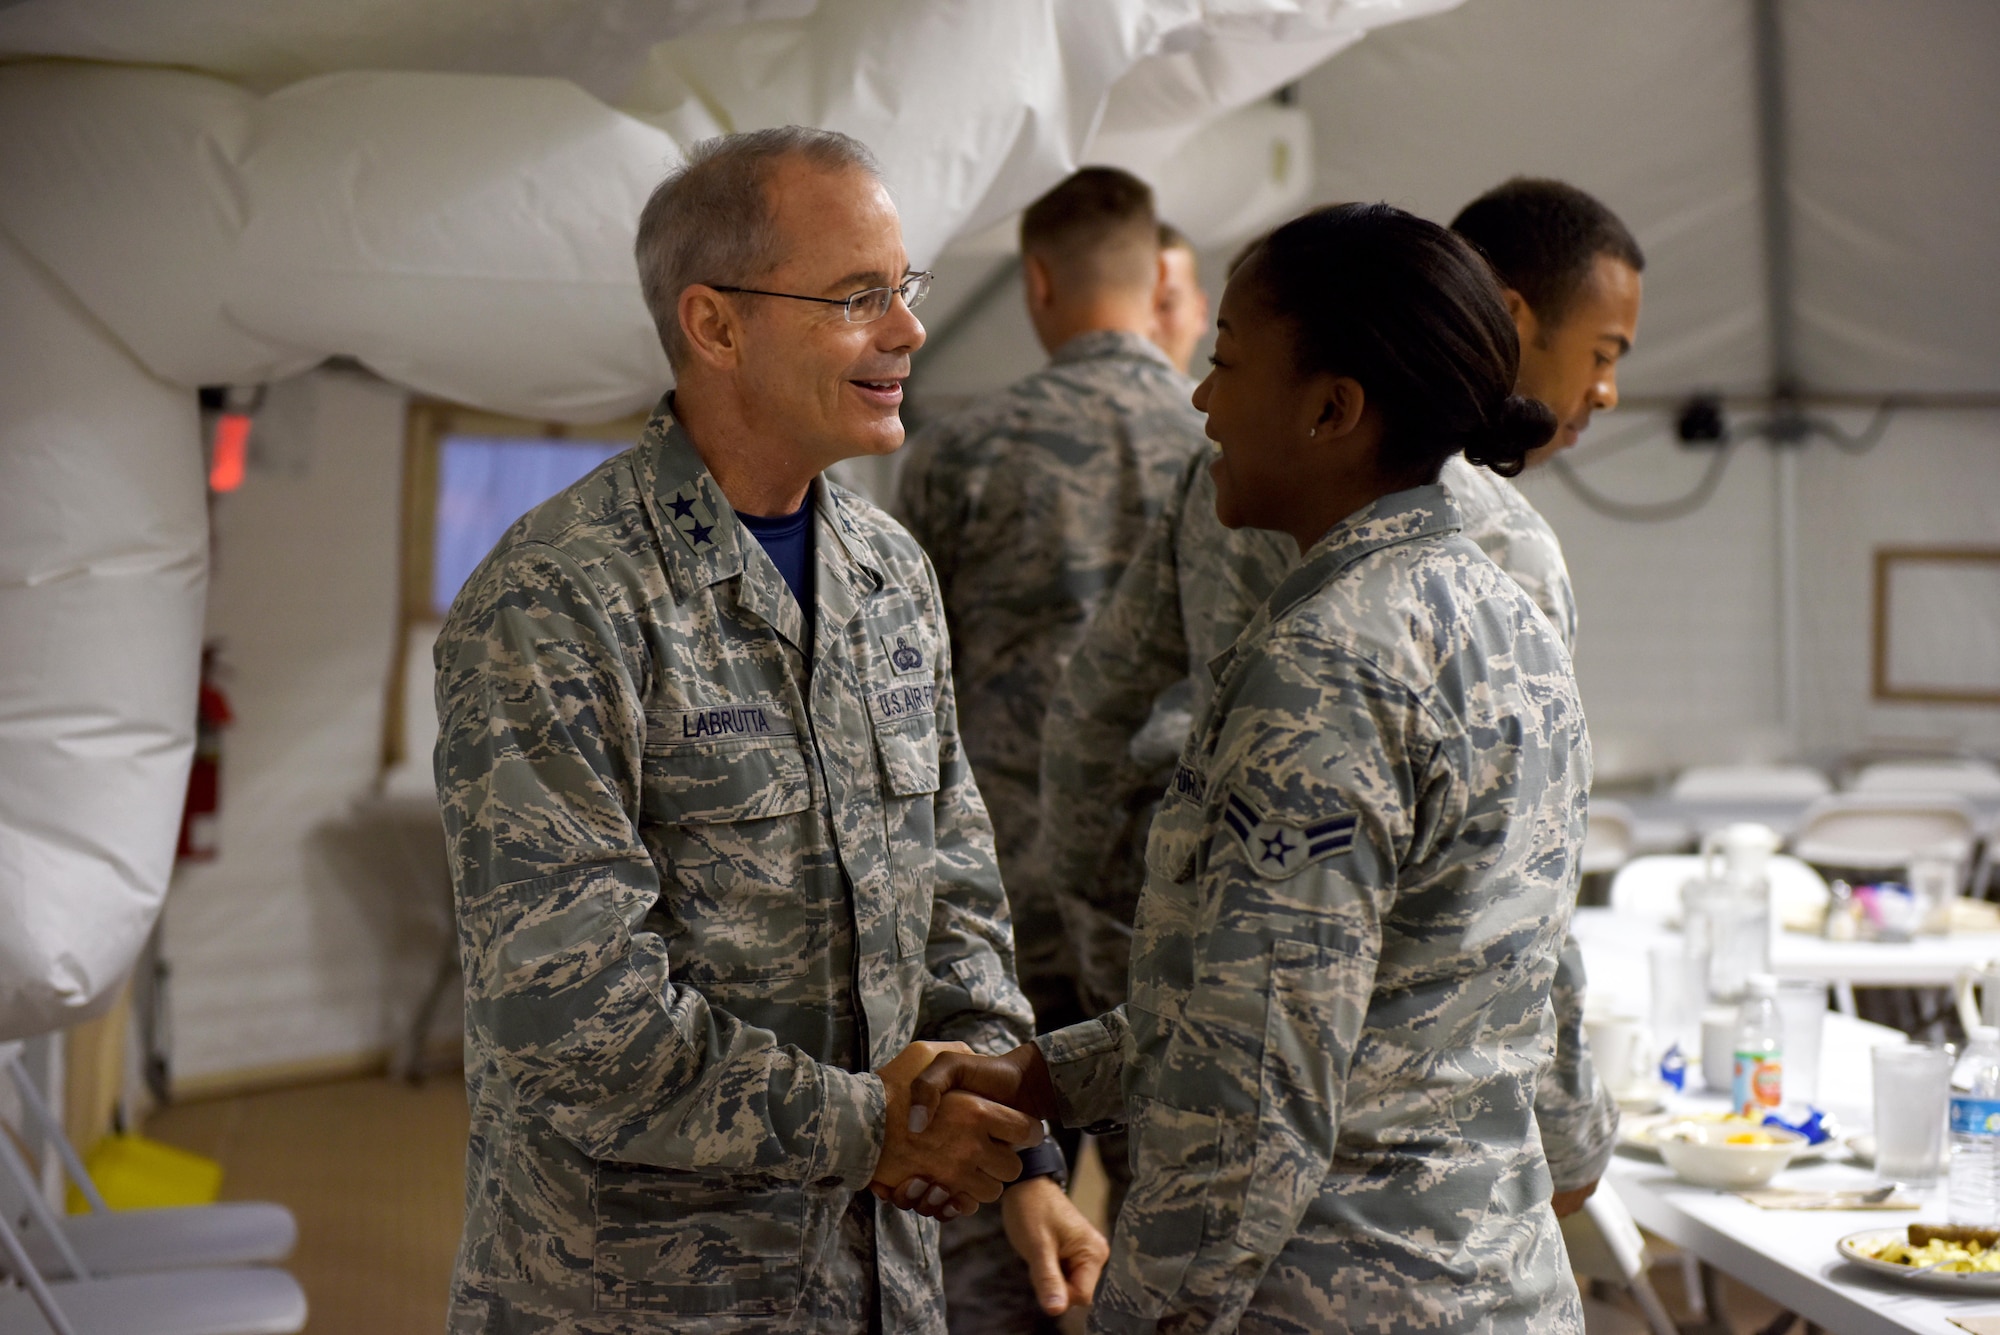 U.S. Air Force Maj. Gen. Bob LaBrutta, 2nd Air Force Commander, shakes hands with Airman 1st Class Audacity Harris, 17th Comptroller Squadron financial technician, at the Cressman Dining Facility temporary annex on Goodfellow Air Force Base, Texas, Oct. 7, 2016. LaBrutta came for a two-day base tour and ate breakfast with junior-enlisted Airmen on Friday morning. (U.S. Air Force photo by Airman 1st Class Chase Sousa/Released)